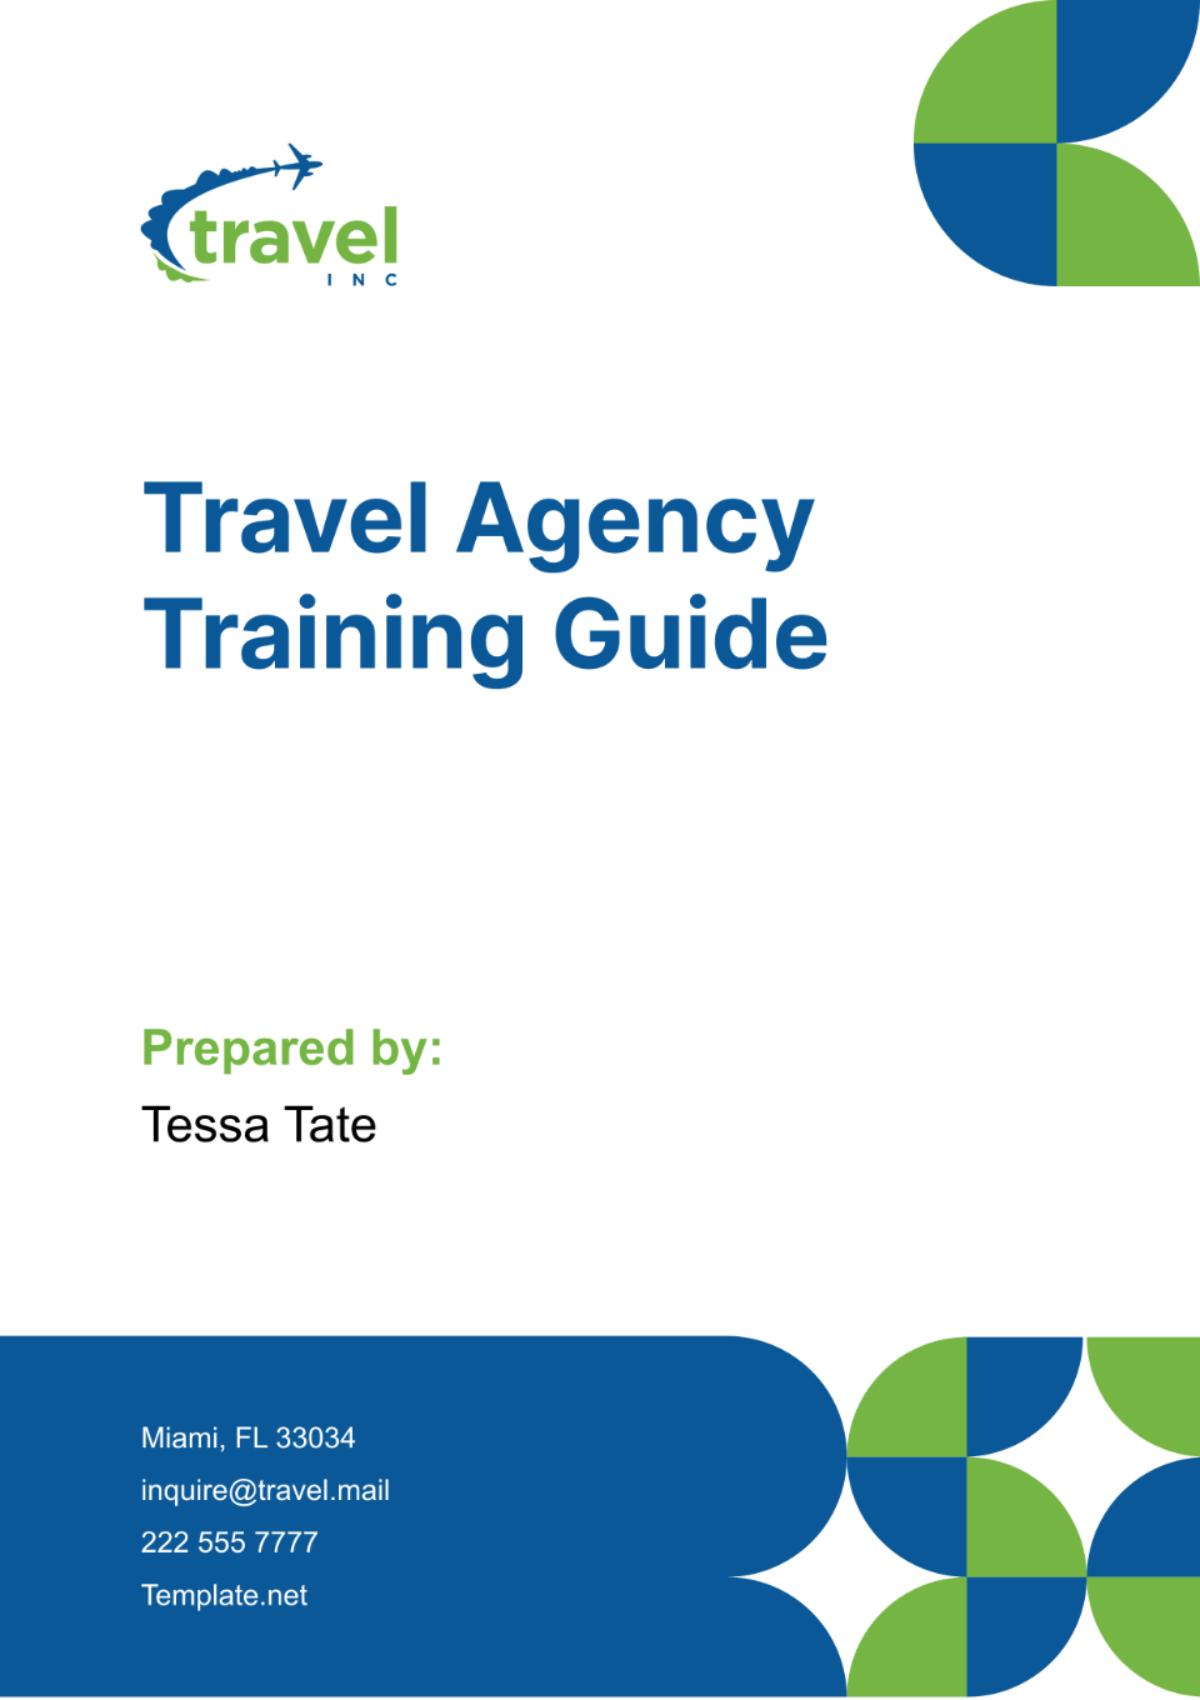 Travel Agency Training Guide Template